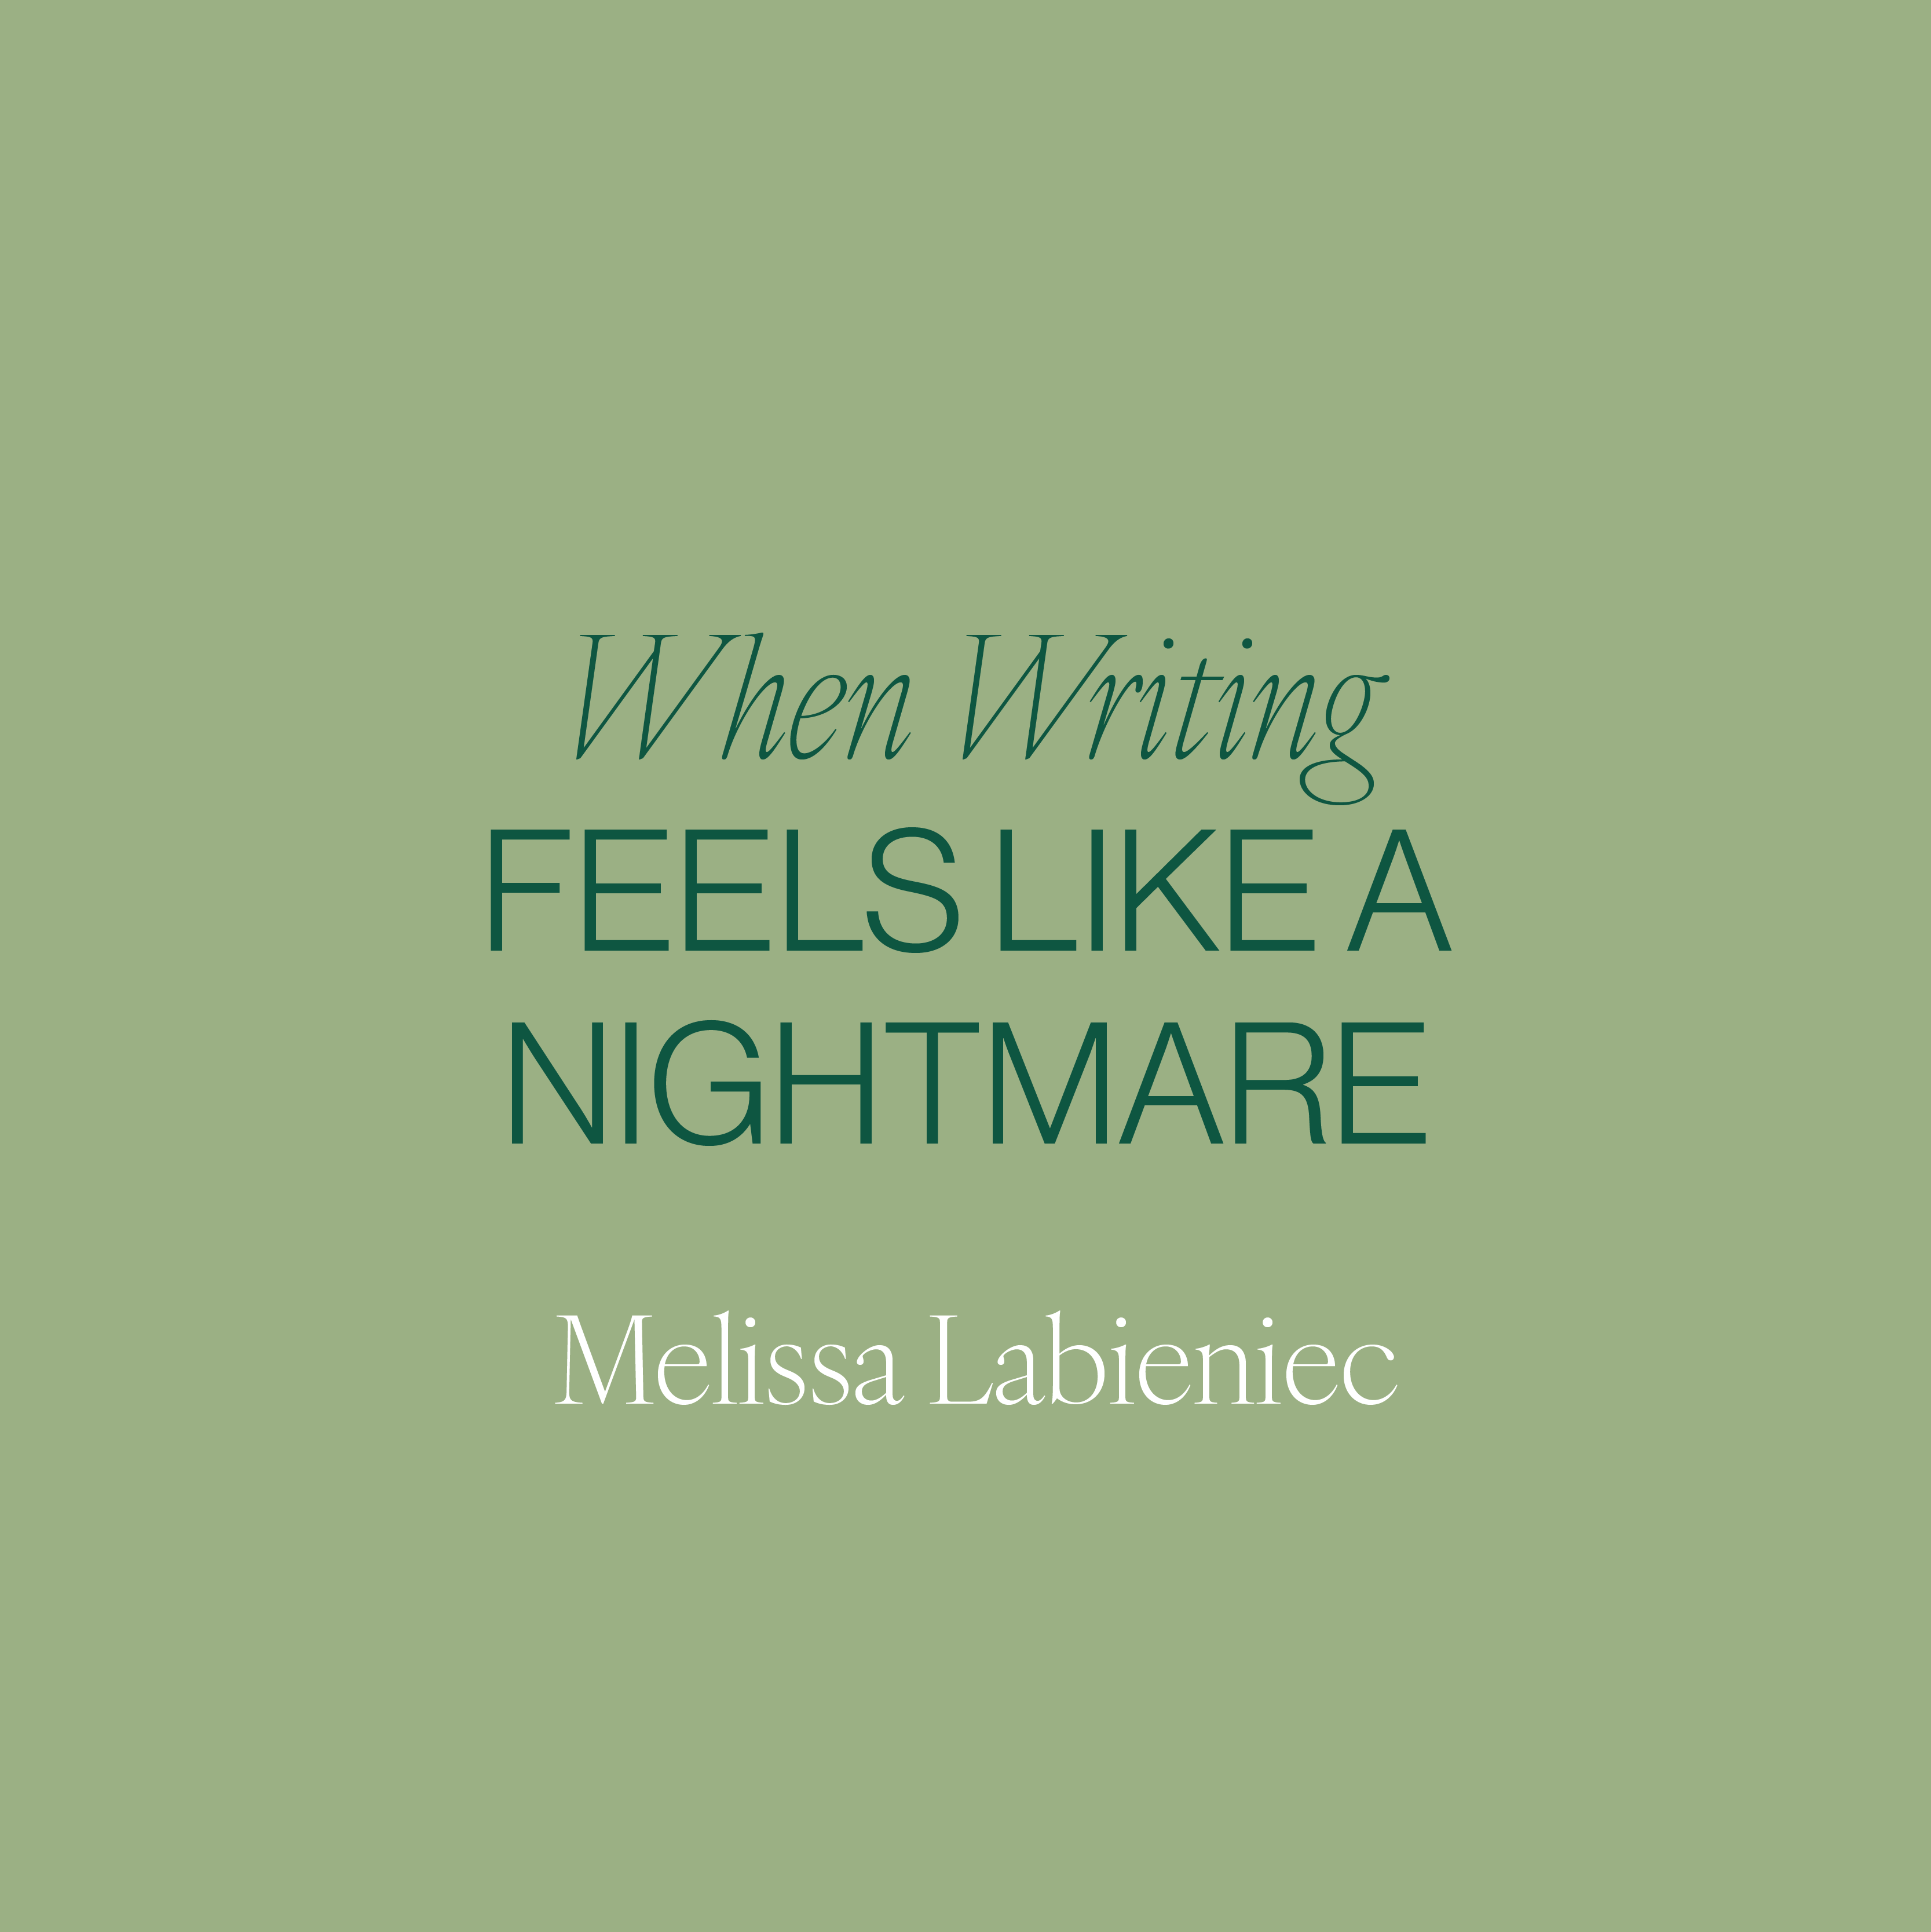 Most of the time, writing is a much-needed and wanted outlet for me. One that is not only fulfilling but rewarding from beginning to end. But there are times when this writing life can turn into more of a nightmare. I get lost for words and confidence and more. Here is something I hold on to when I am struggling …